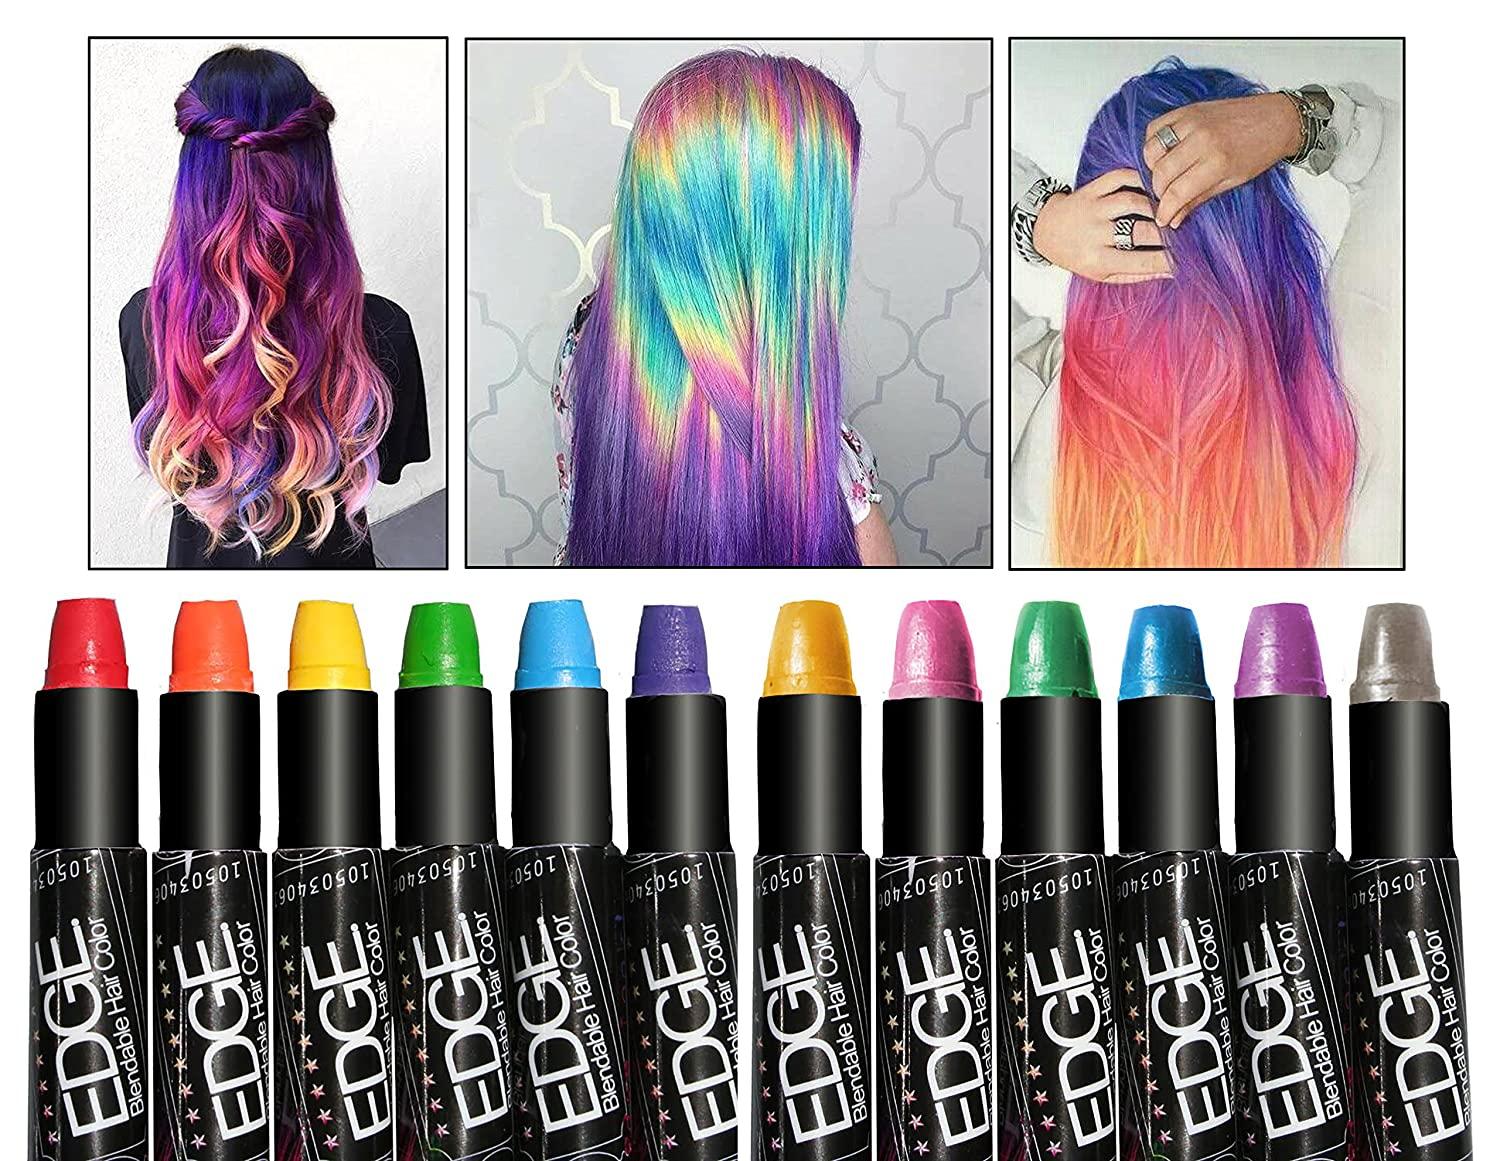 Kids Hair Chalk - JUMBO HAIR CHALK PENS - RAINBOW - Washable Hair Color  Safe For Kids And Teen - 200% MORE COLOR PER PEN - SCENTED - For Party,  Girls Gift,